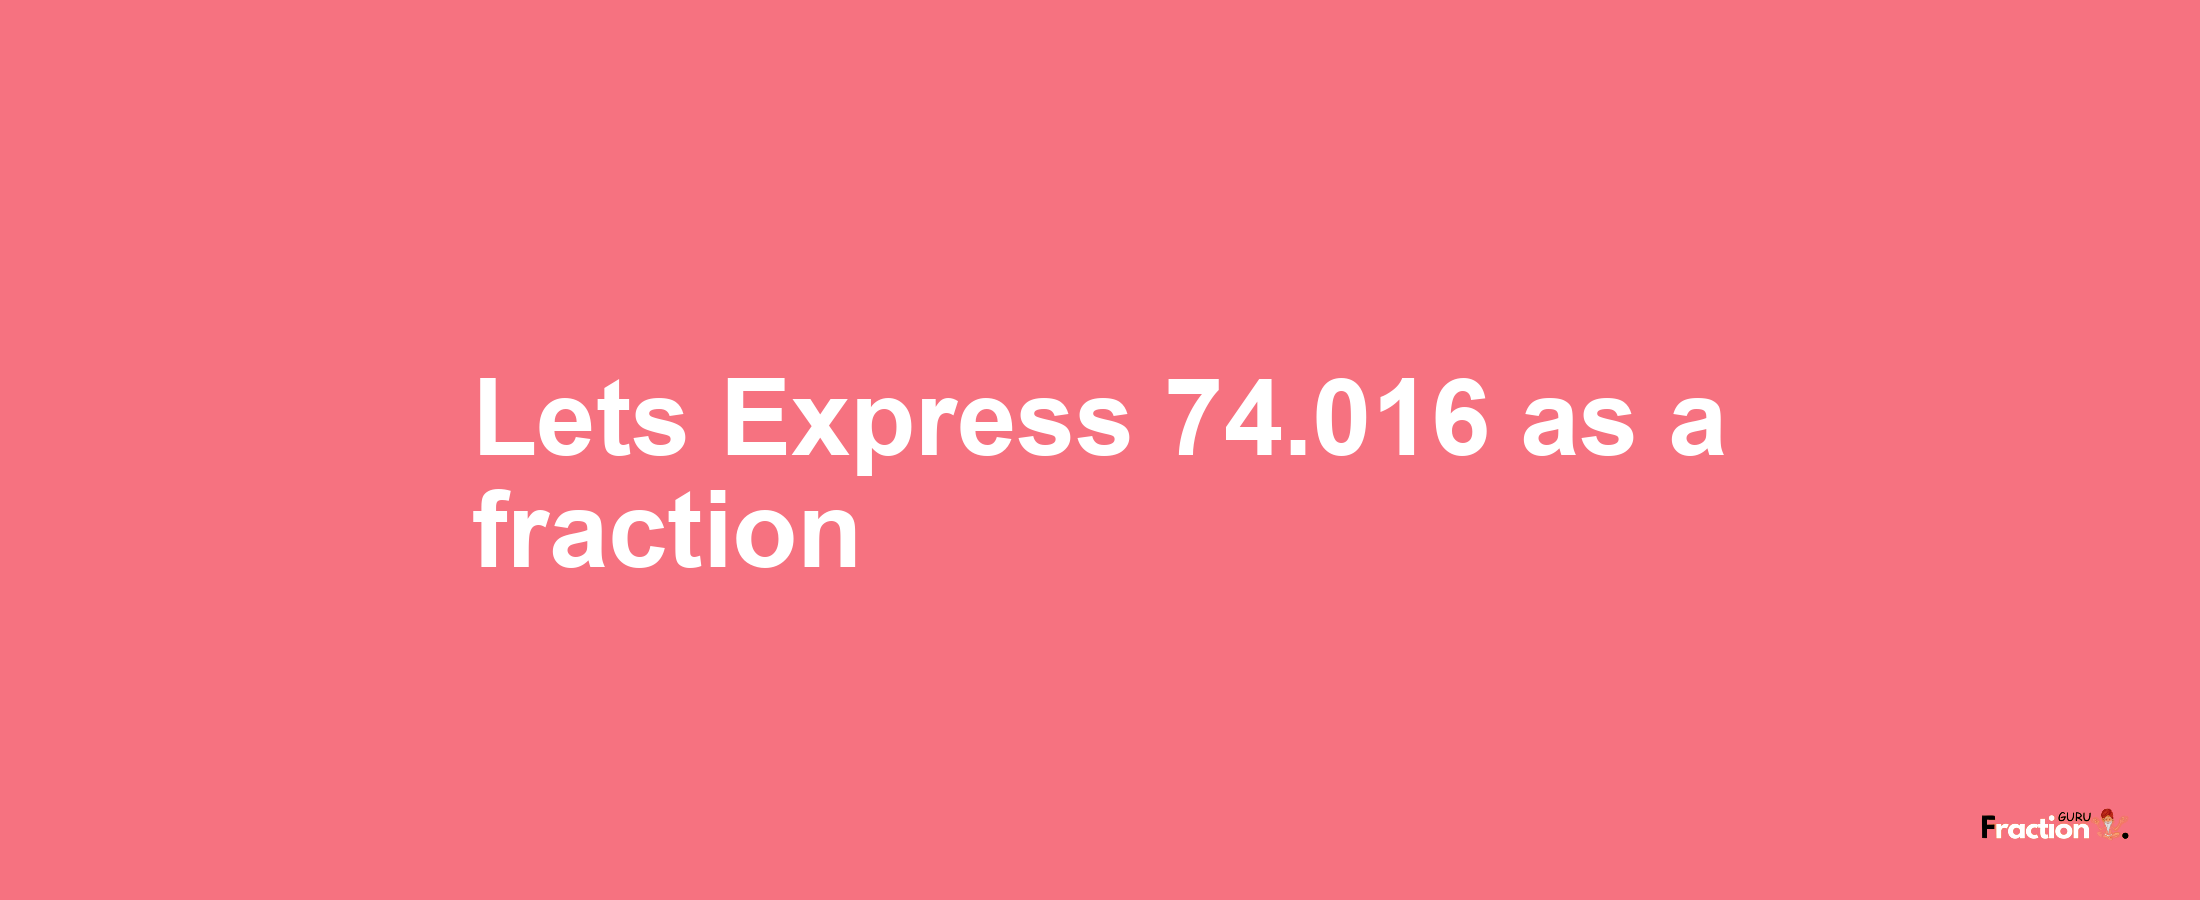 Lets Express 74.016 as afraction